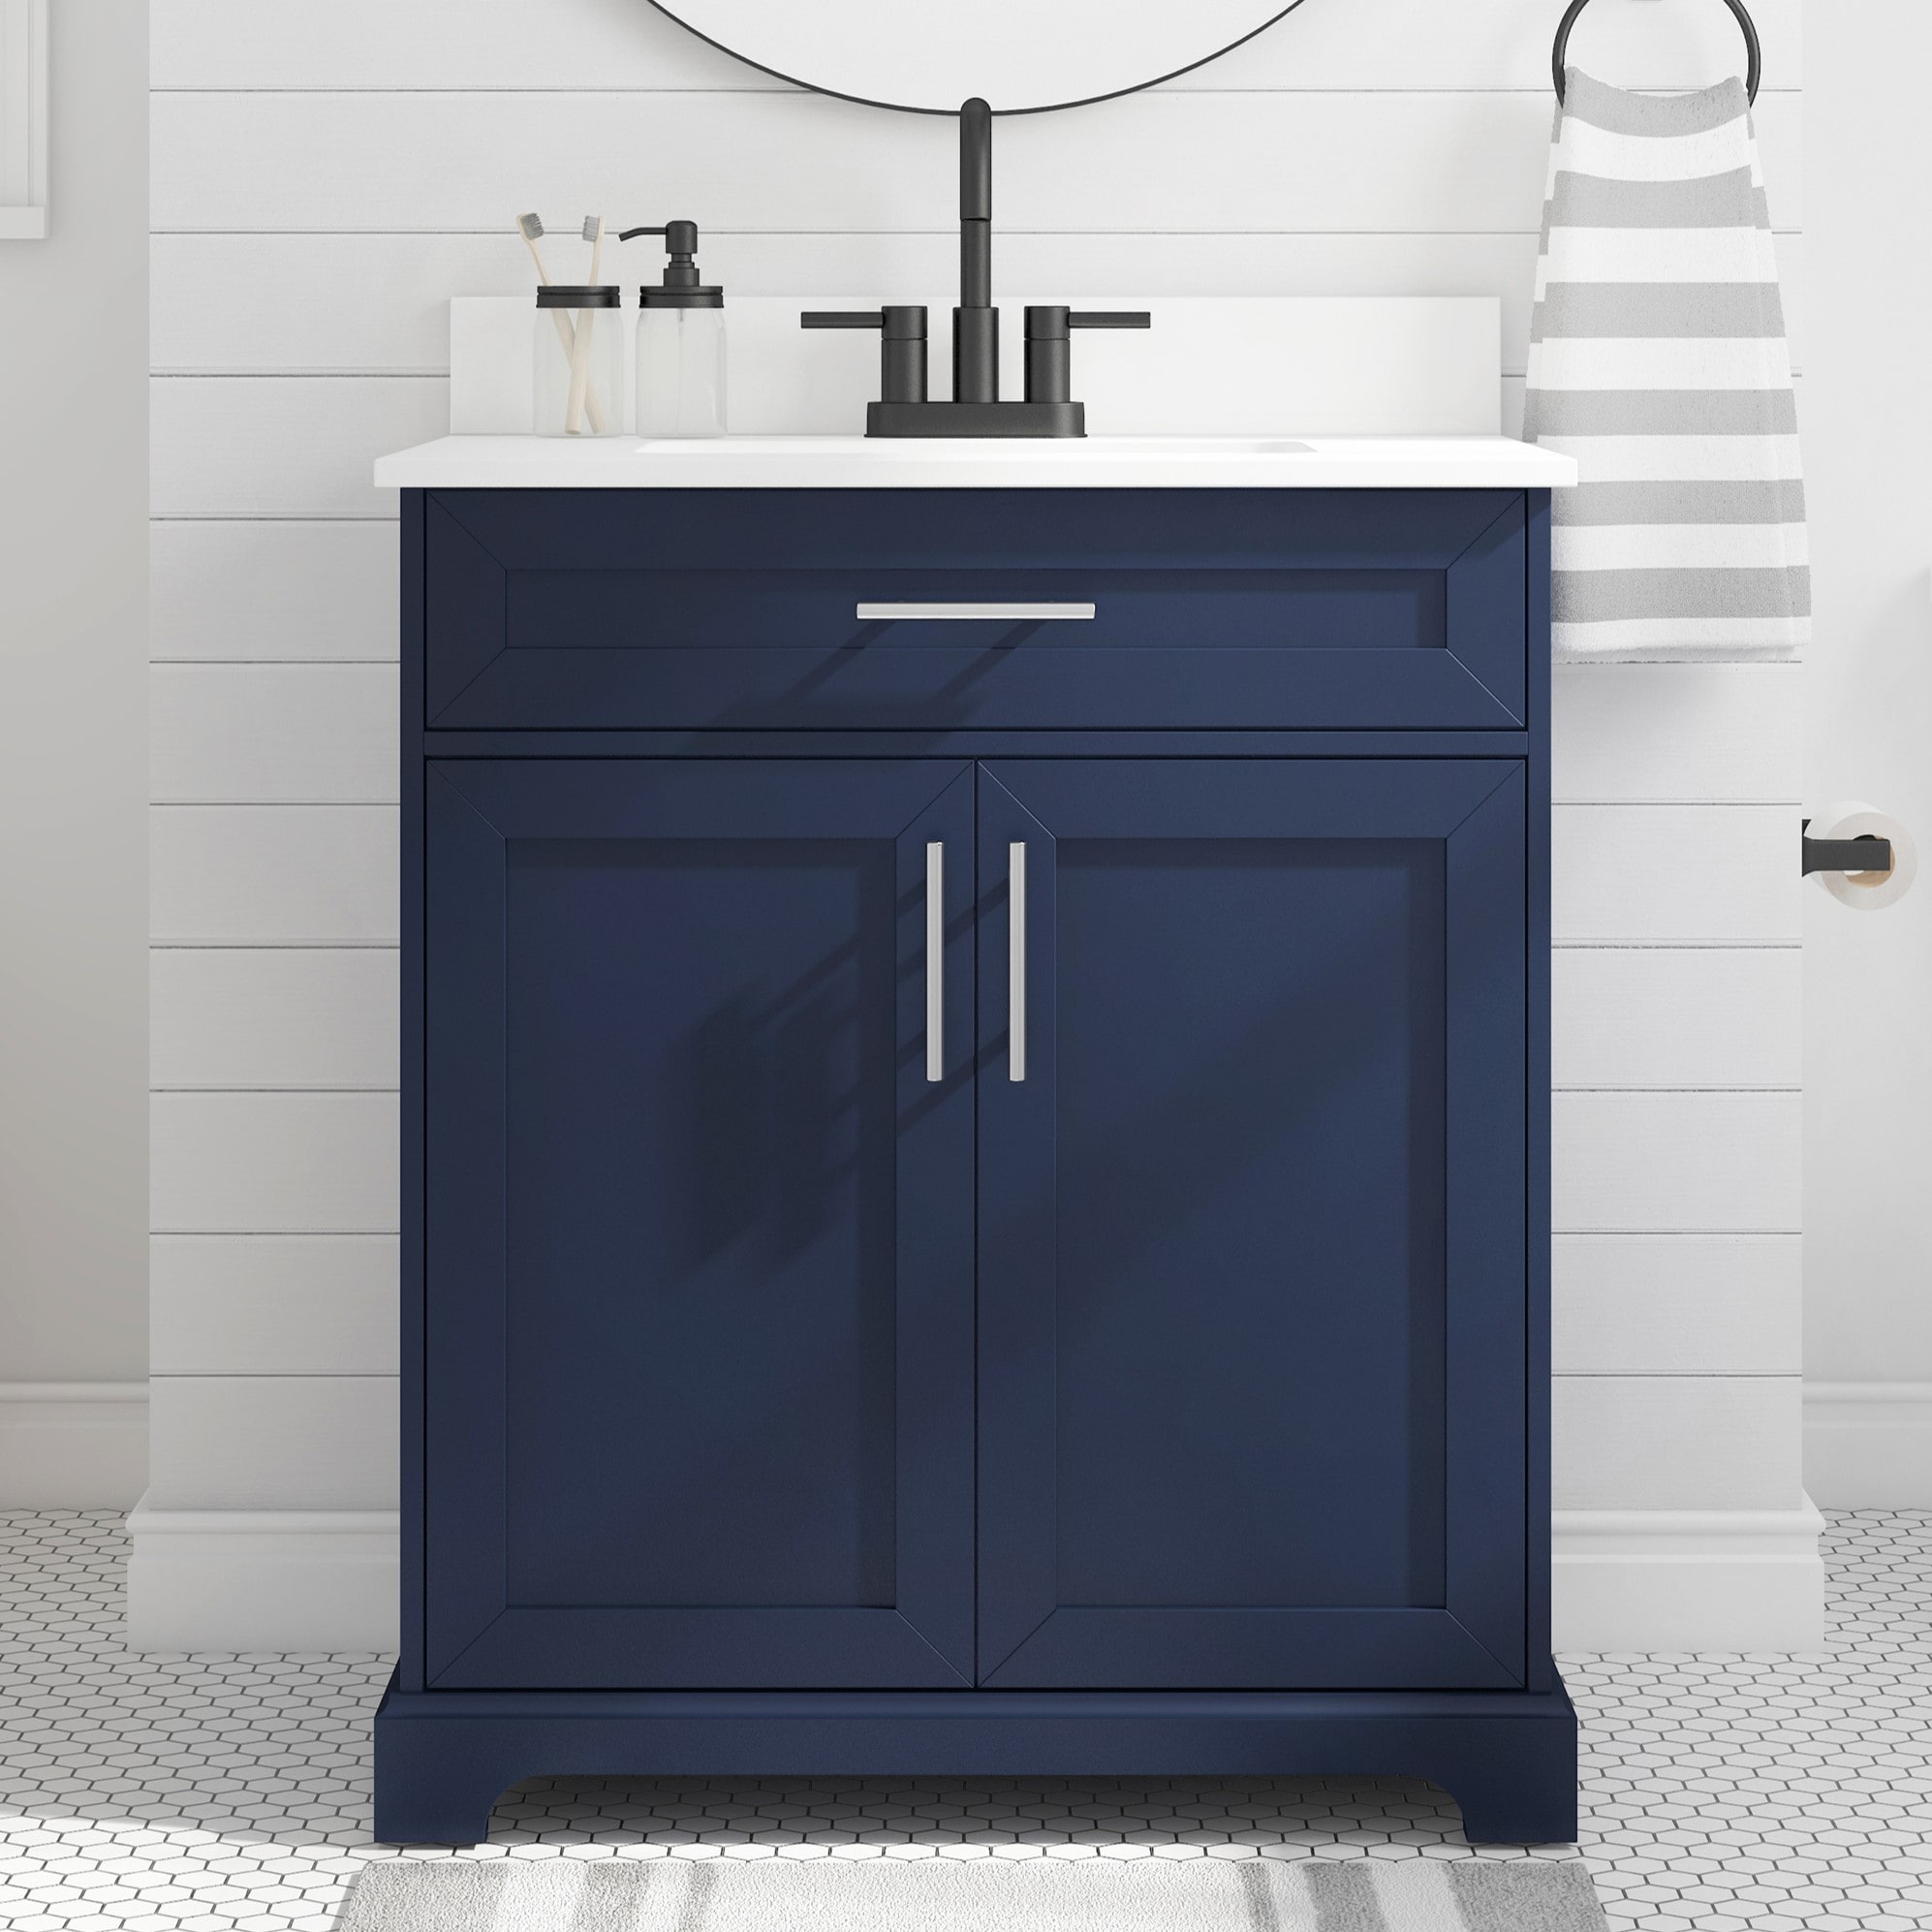 Bathroom Sink Topper Review: It's a Game-Changer for My